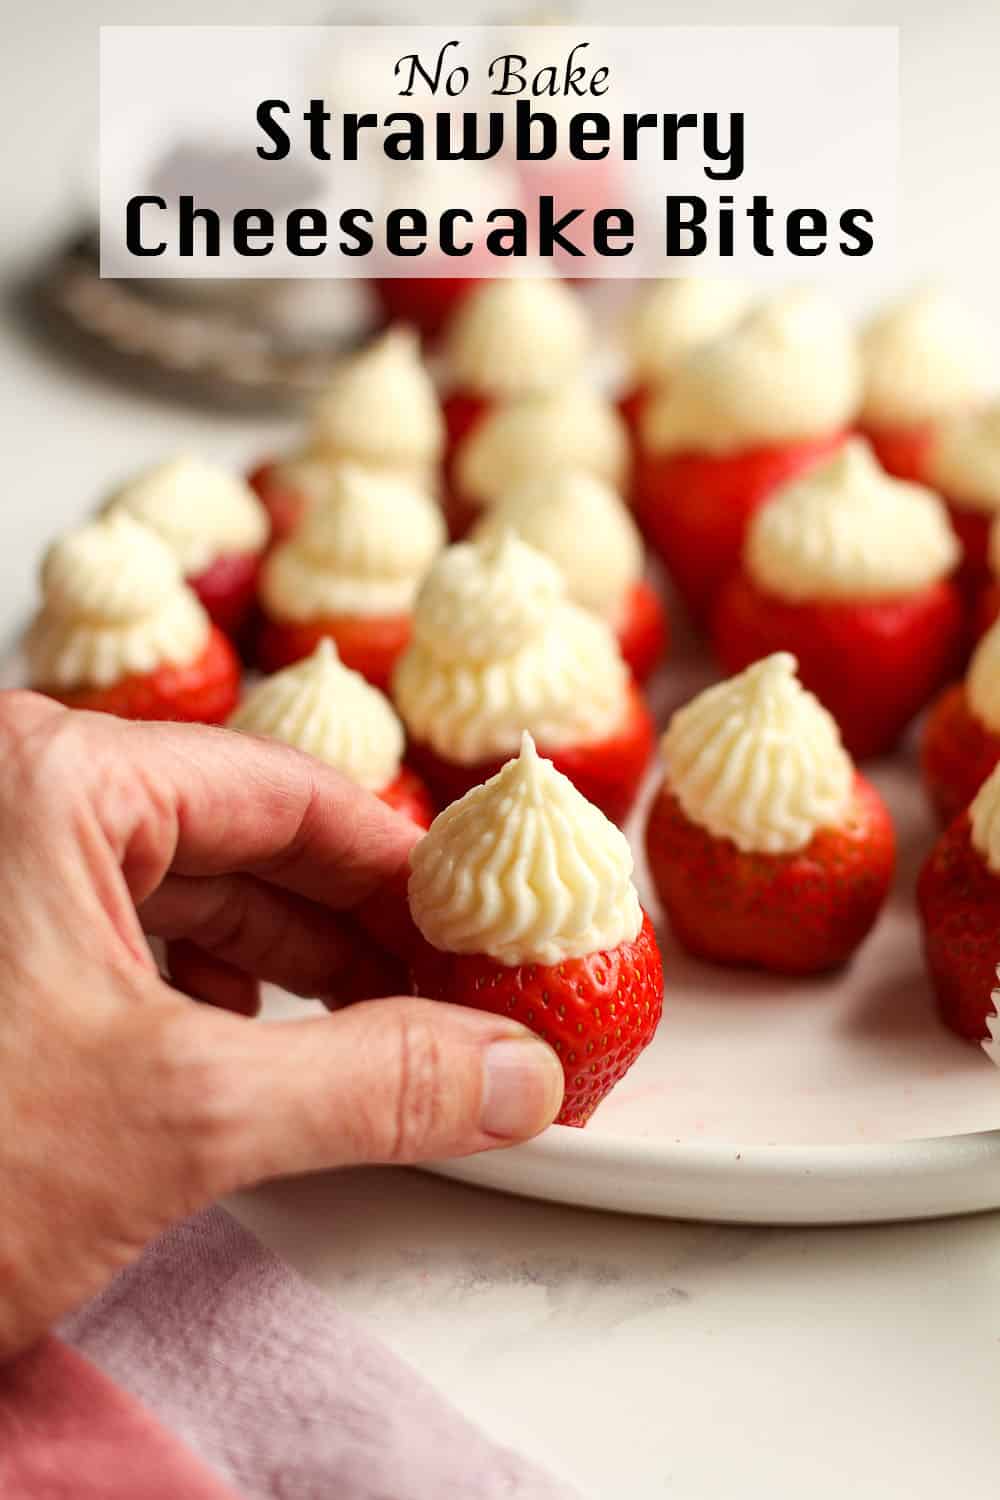 Side view of a plate of strawberry cheesecake bites, with a hand reaching for one.